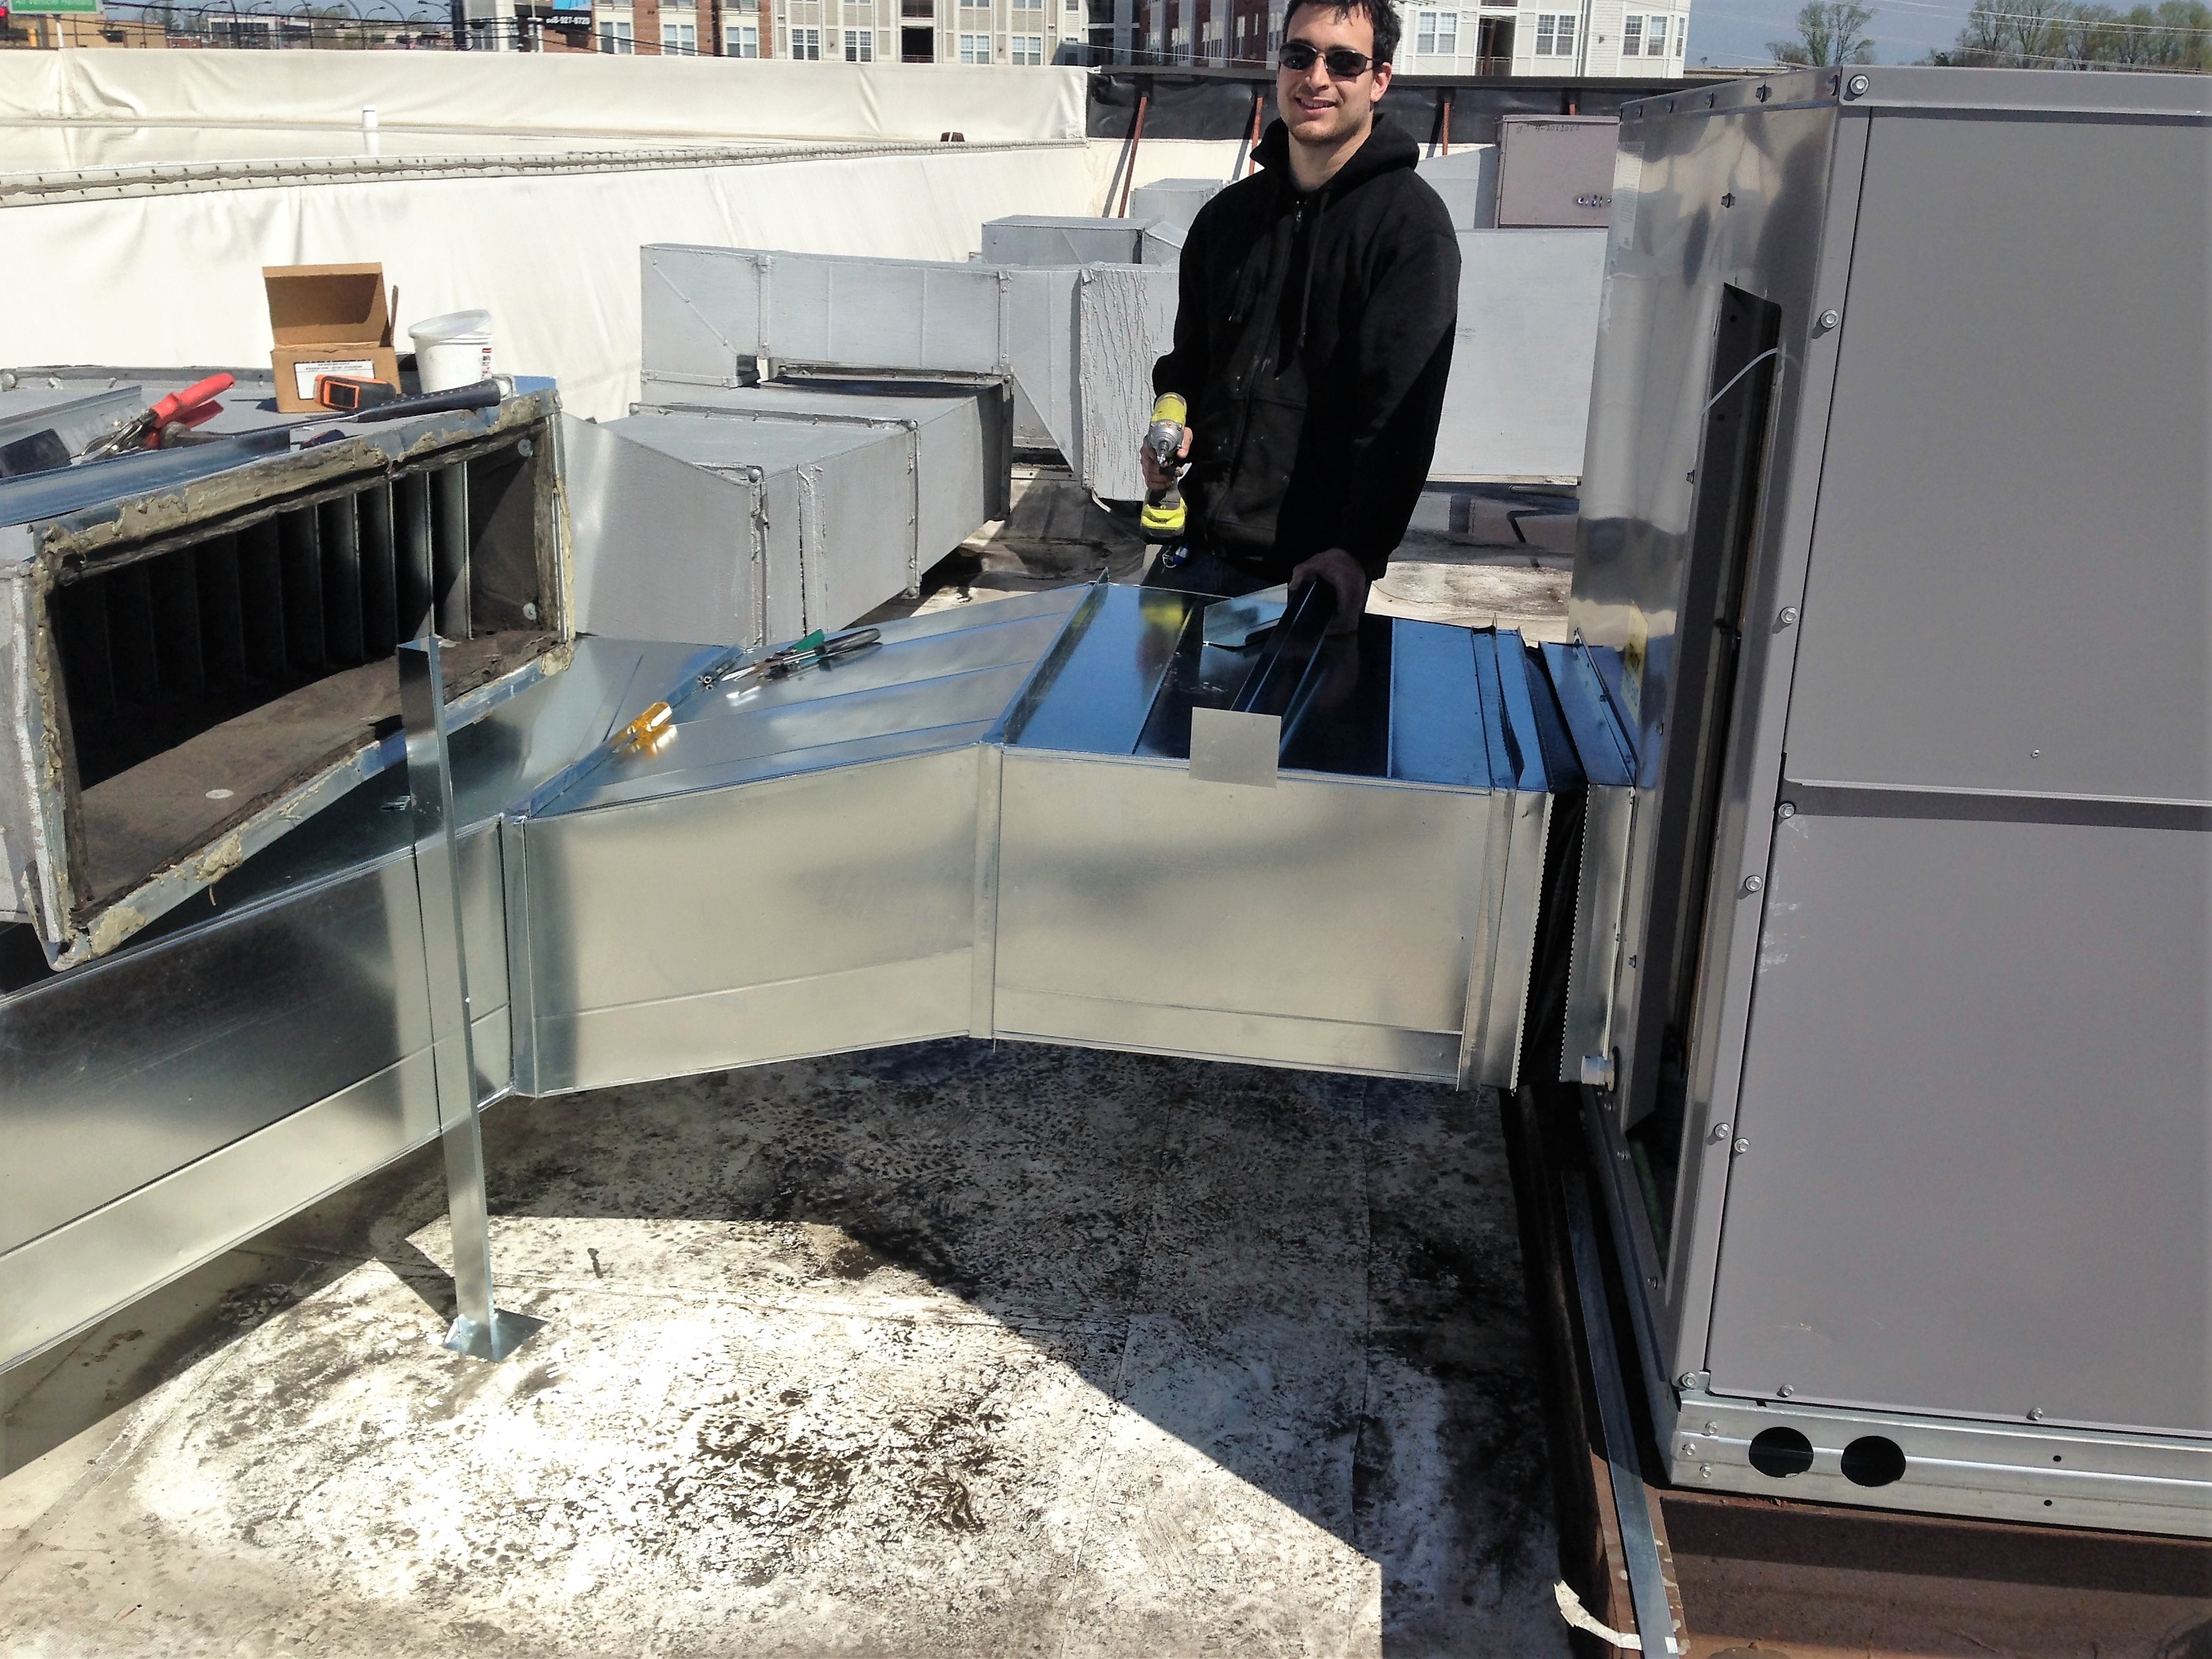 Roof top unit installation